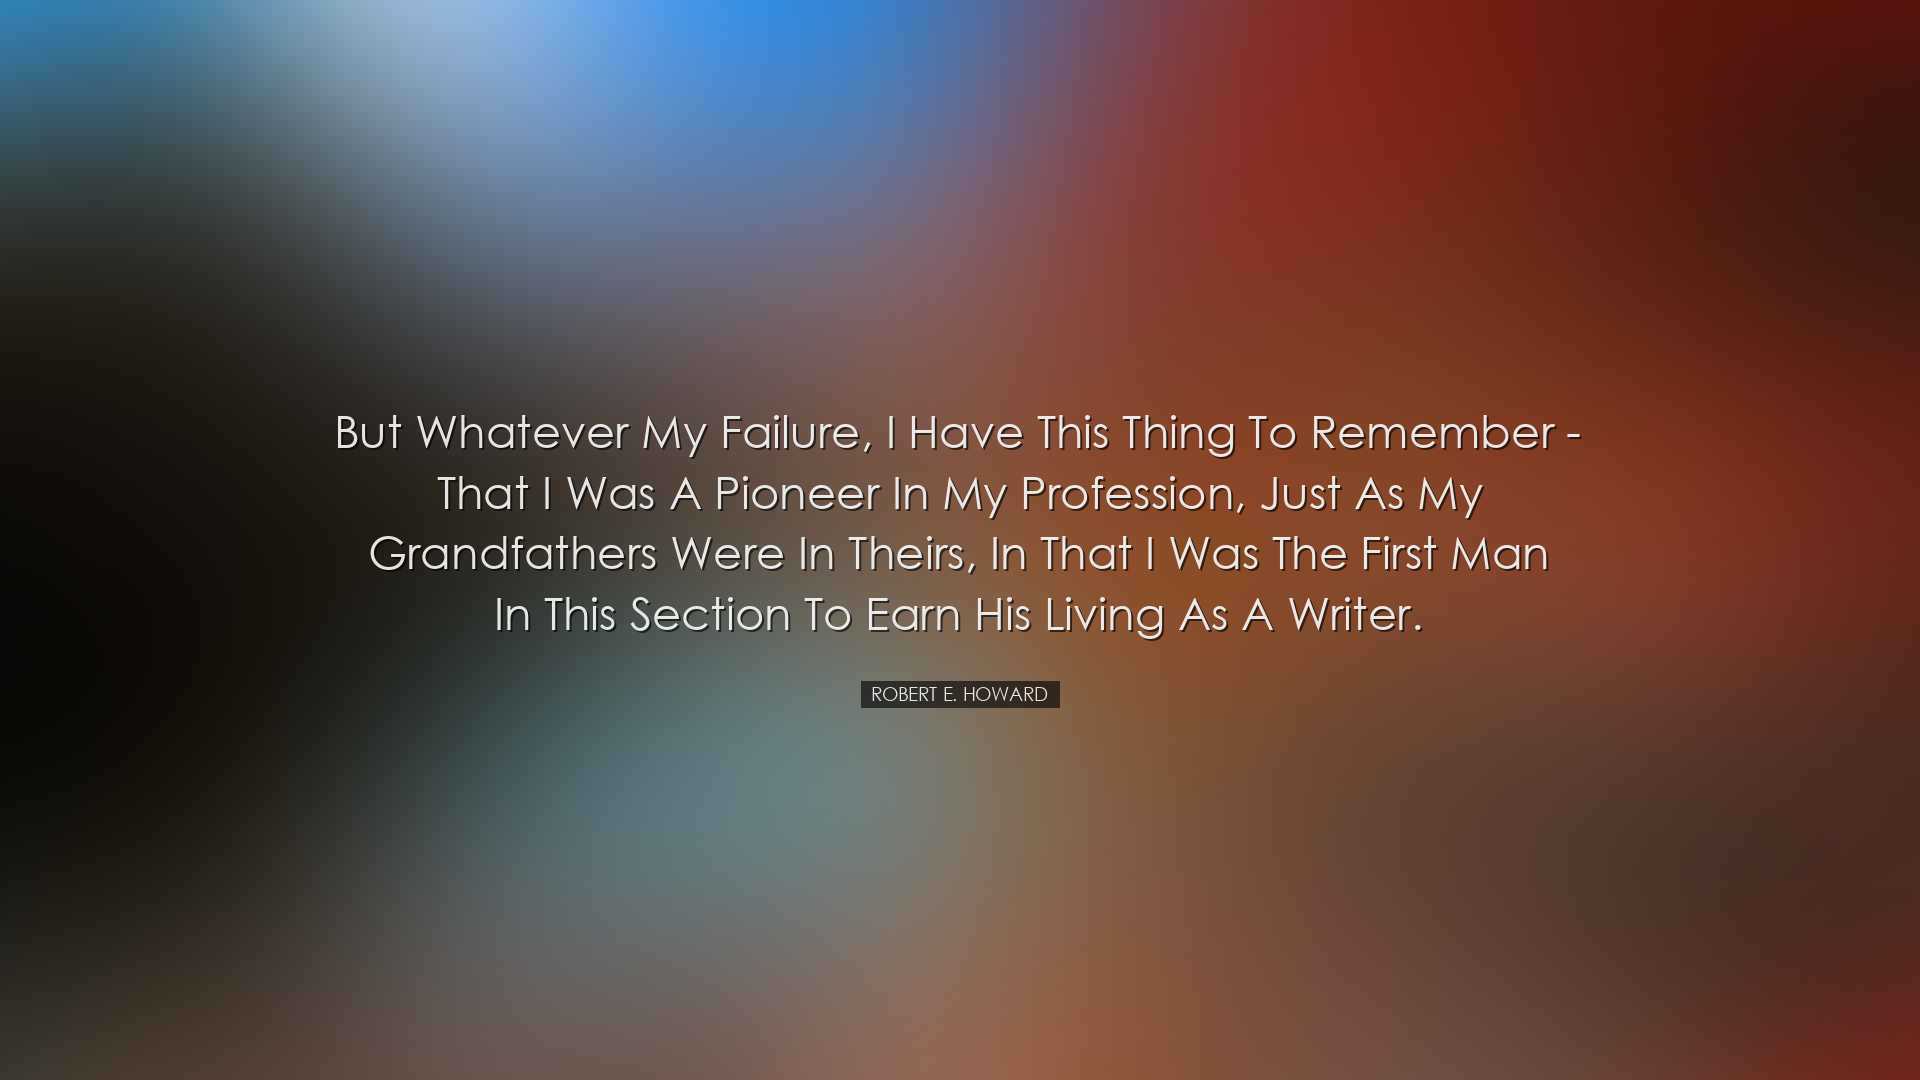 But whatever my failure, I have this thing to remember - that I wa